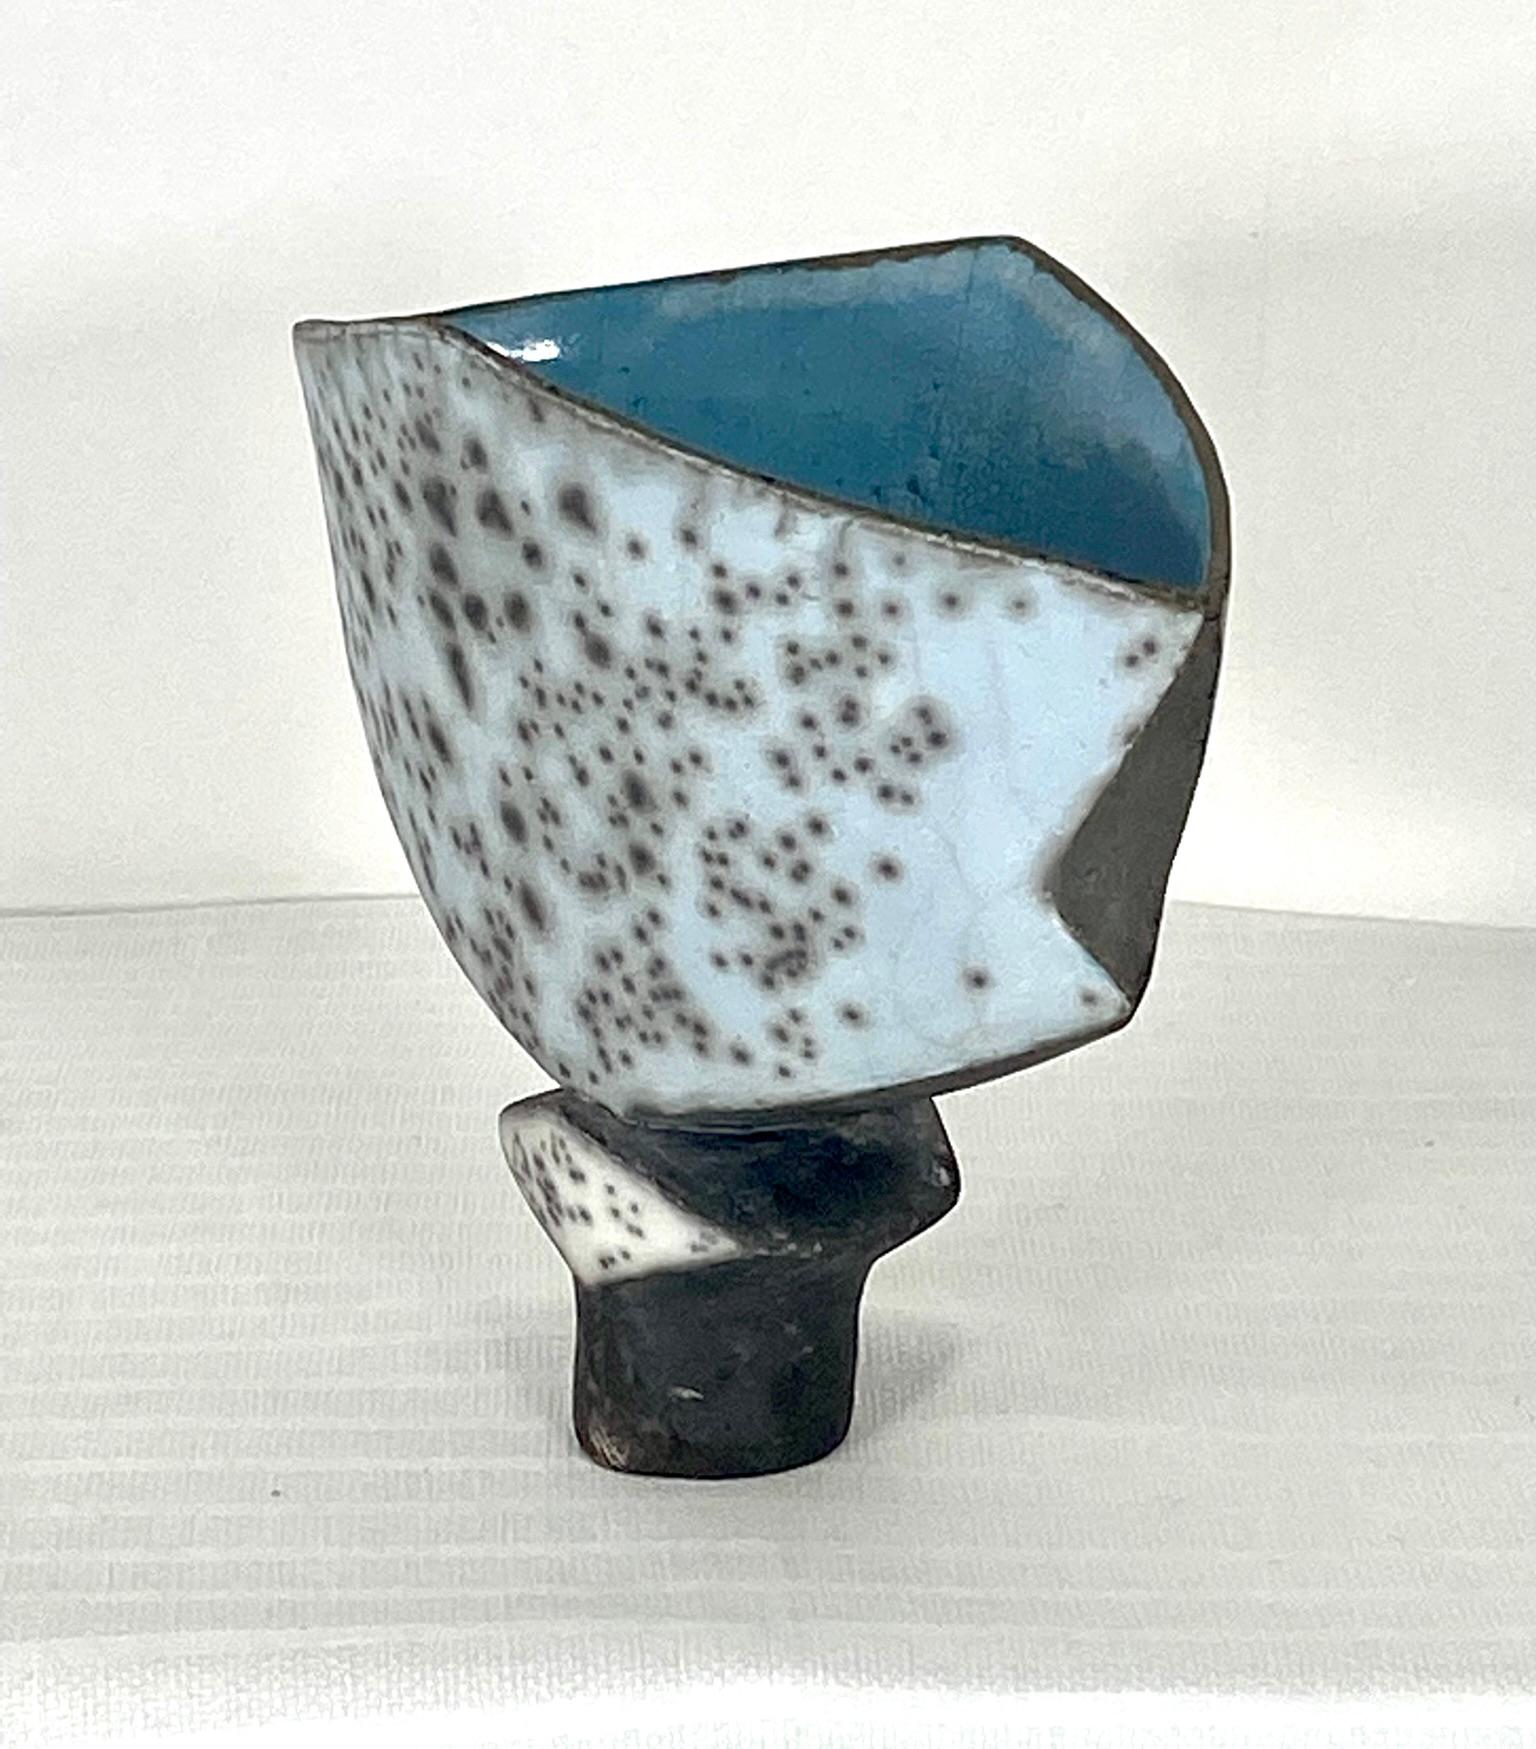 Sculptural vase by Elizabeth Raeburn United Kingdom potter. Blue Ruku glaze abstract Studio art pottery vase. Measures: 9 inches wide by 5 inches deep by 8 inches high.